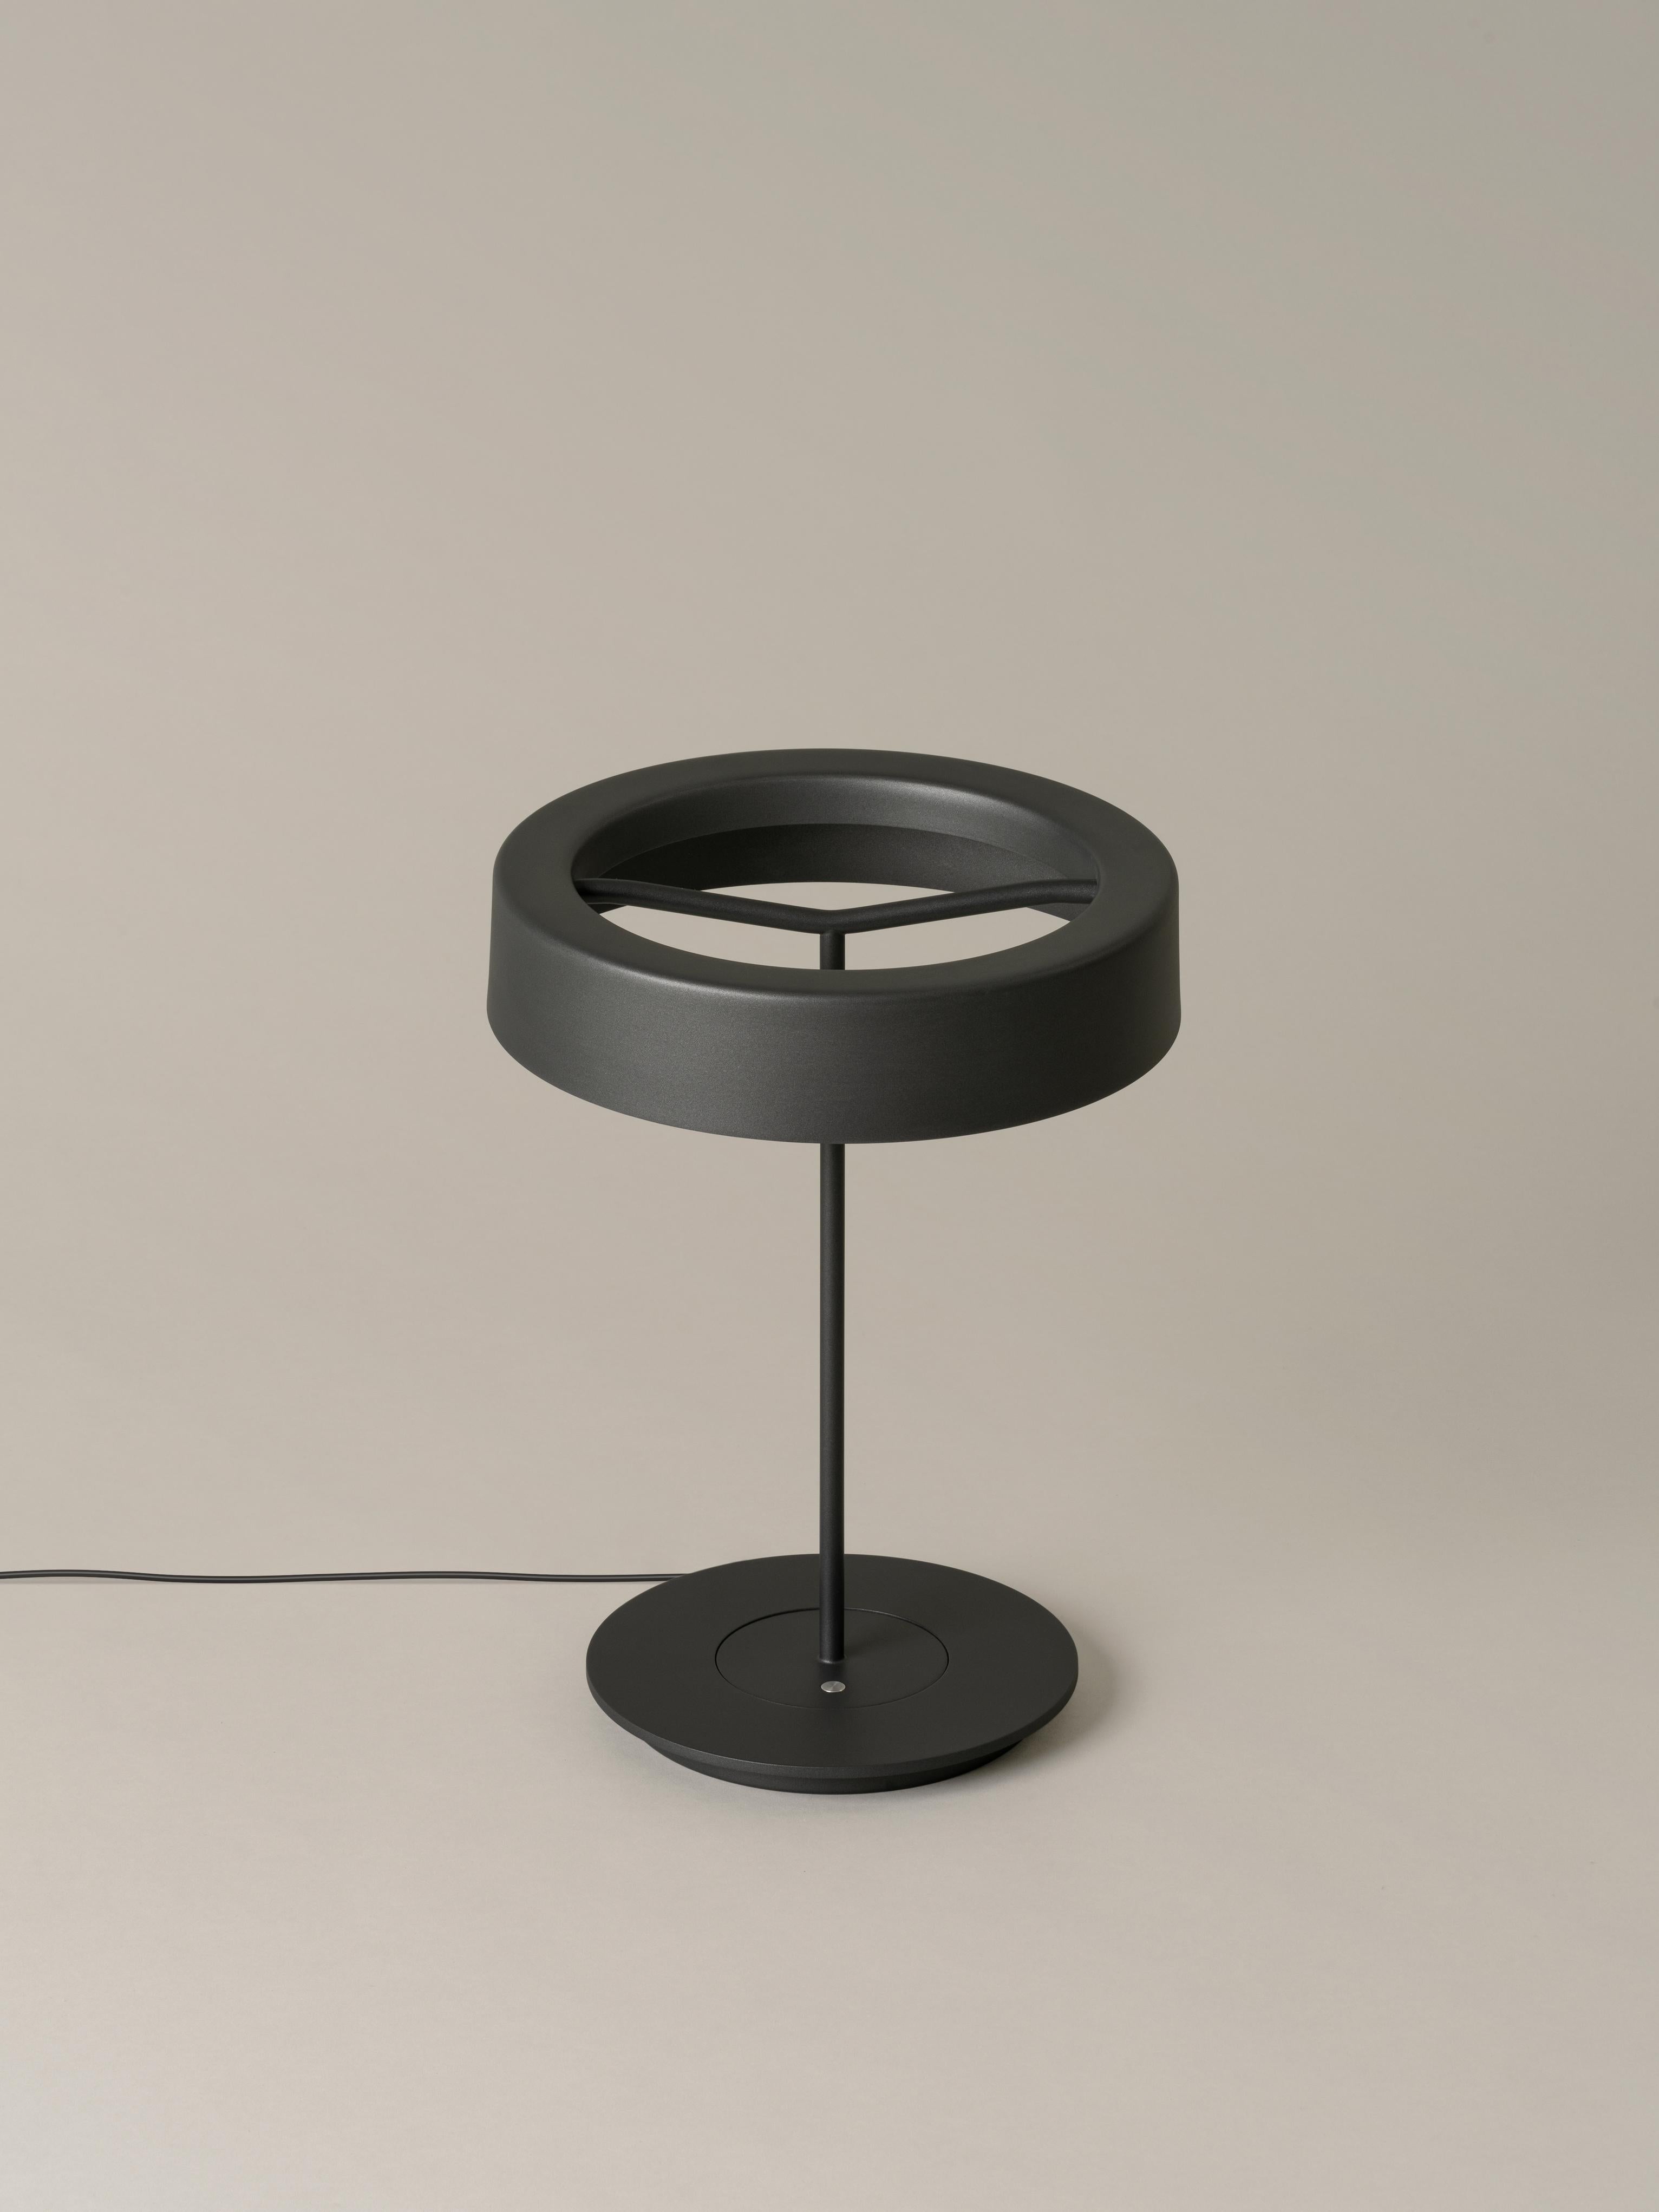 Small graphite sin table lamp with shade by Antoni Arola.
Dimensions: D 27 x H 36 cm.
Materials: Metal.
Available in white or graphite, with or without shade.

A lamp that combines simplicity and technology to create a lucent ring of light